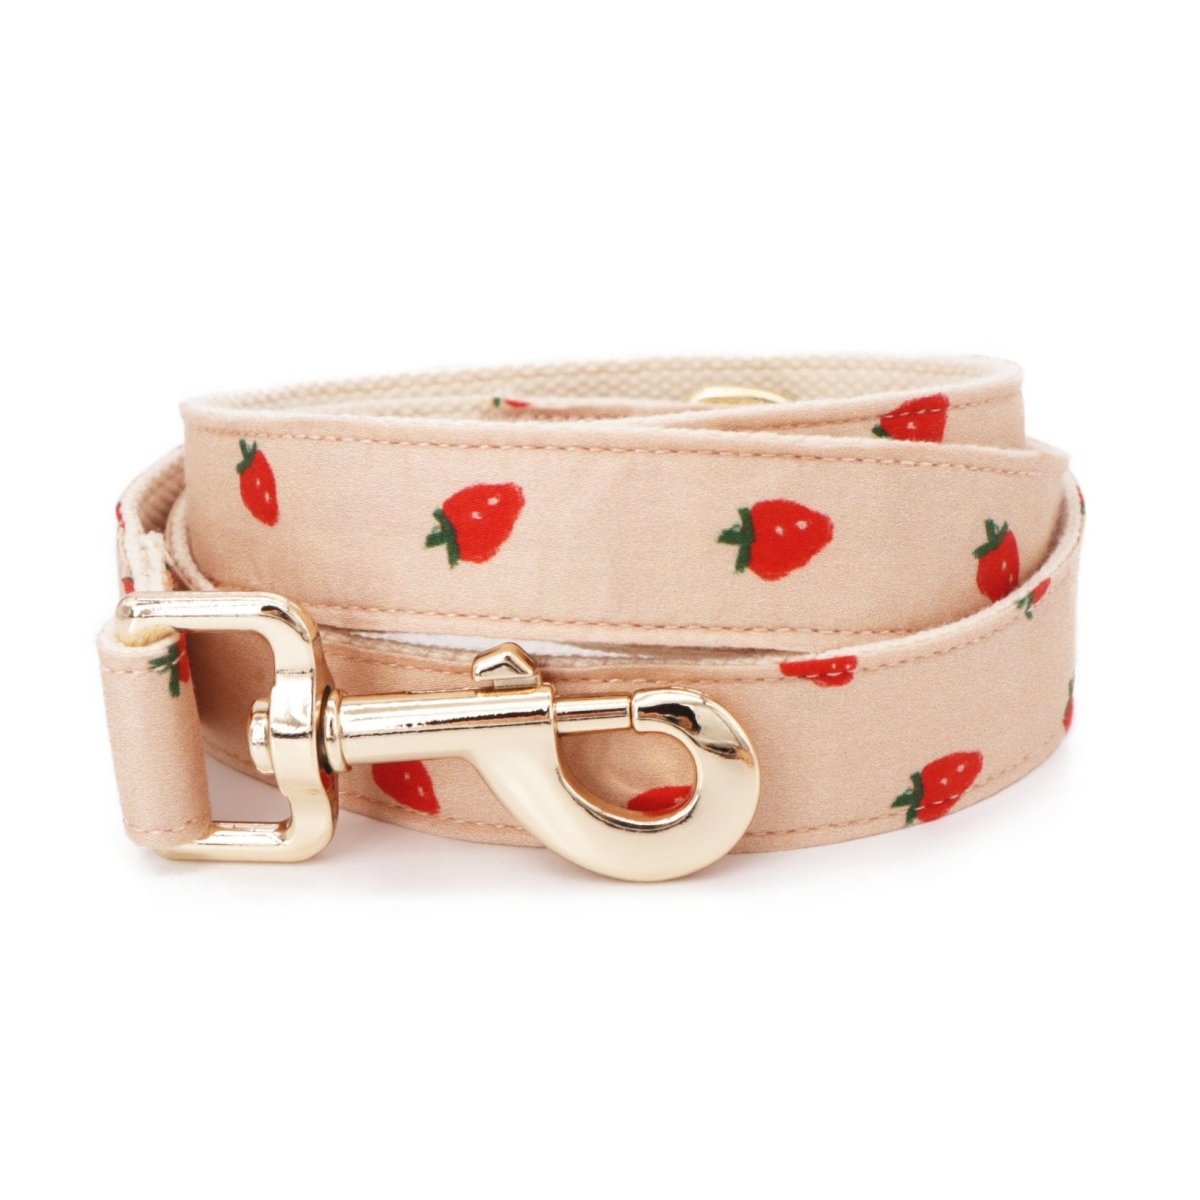  Lucky Love Dog Combo Set, Floral Dog Collar and Leash Set for  Medium Dogs, Cute Girl Matching Collar & Leash Set, Part of Purchase  Donated to Rescue (Ladybird Combo, Medium) 